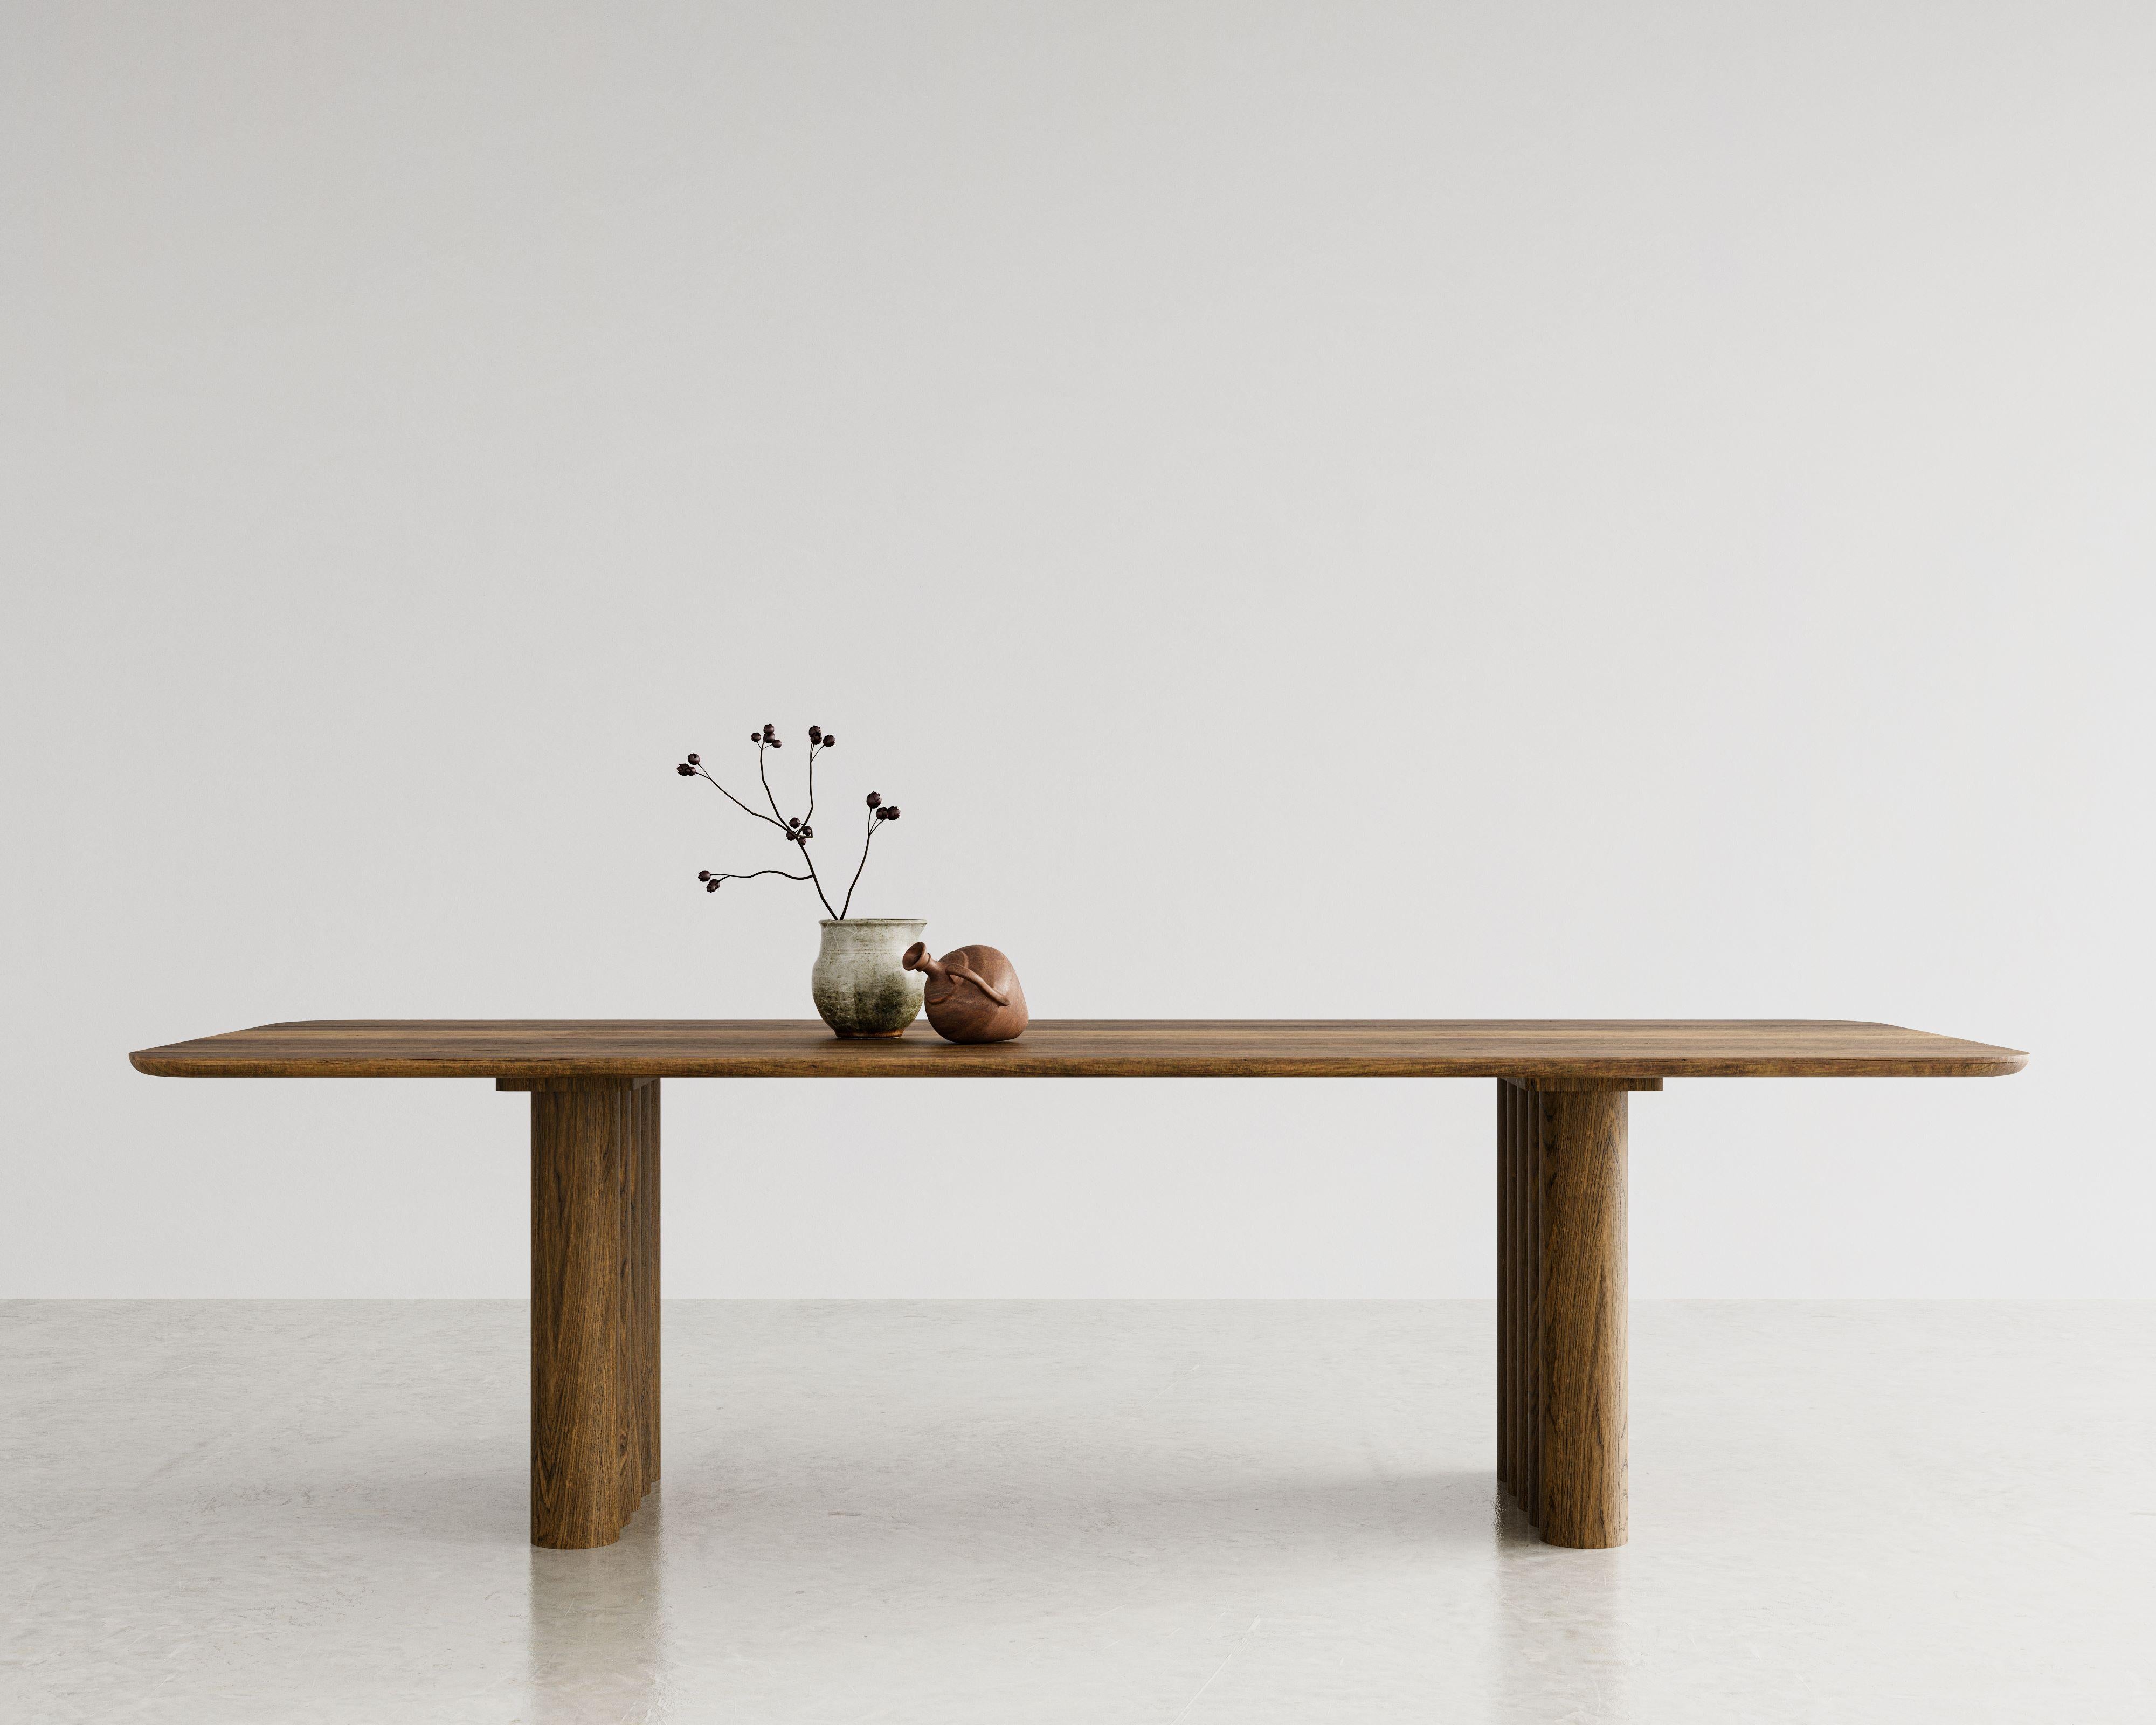 PLUSH dining table, rectangular, 200 cm.
Solid wood table top and legs. Handmade in Denmark. 
Signed by Jacob Plejdrup for DK3

Table's height: 72 or 74 cm
Sold model: 
Smoked Oak
Legs Thickness: 130 mm
Table top Thickness: 30 mm

Other choice
Table